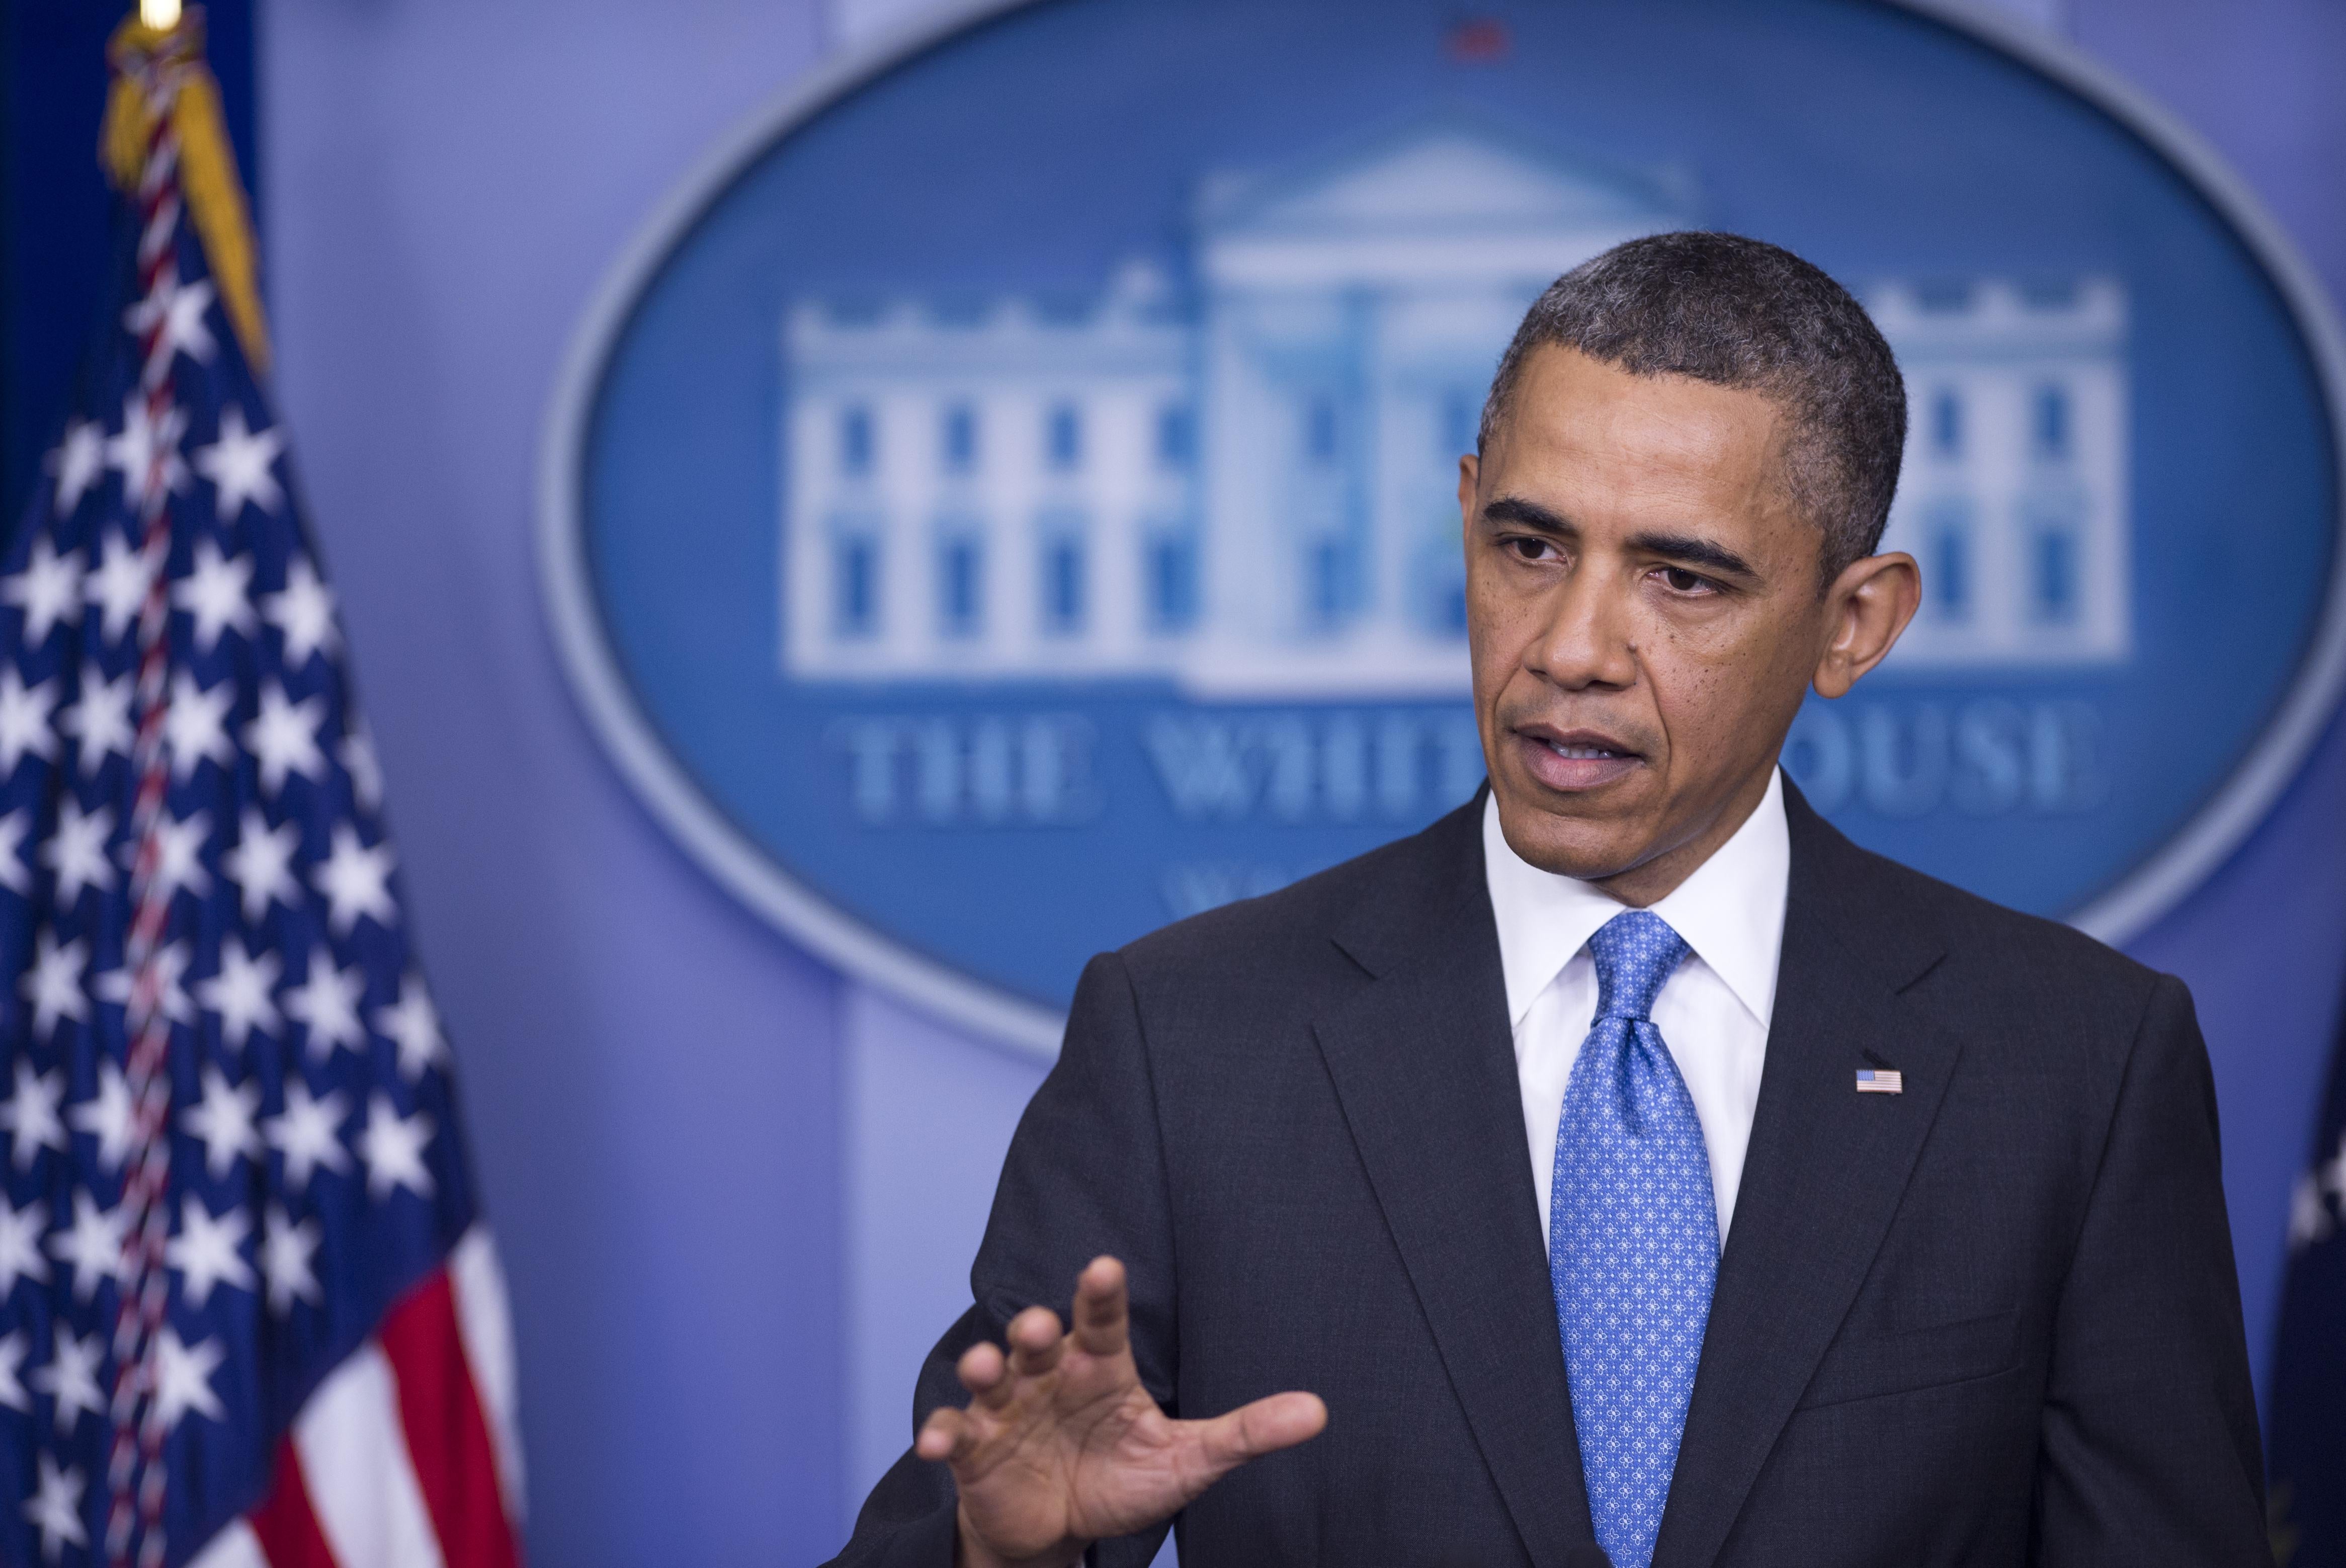 Obama Says America Will Be 'OK' In Final Press Conference